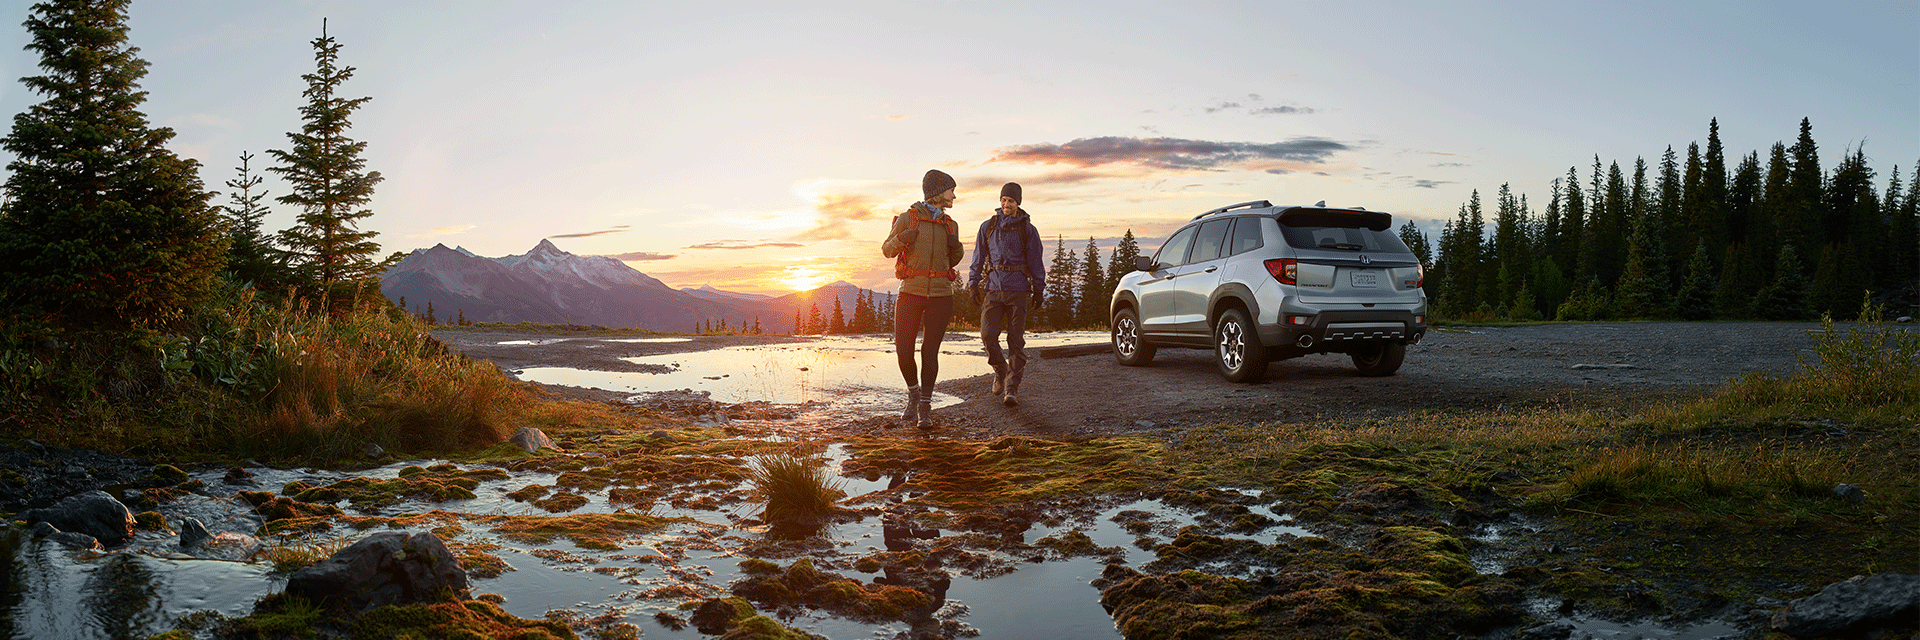 Bennett Honda of Lebanon is a Honda Dealership in Lebanon near Palmyra, PA | People in Hiking Gear Walking away from 2022 Silver Honda Passport towards Camera with Sun Setting Behind Mountains and Lake in Background